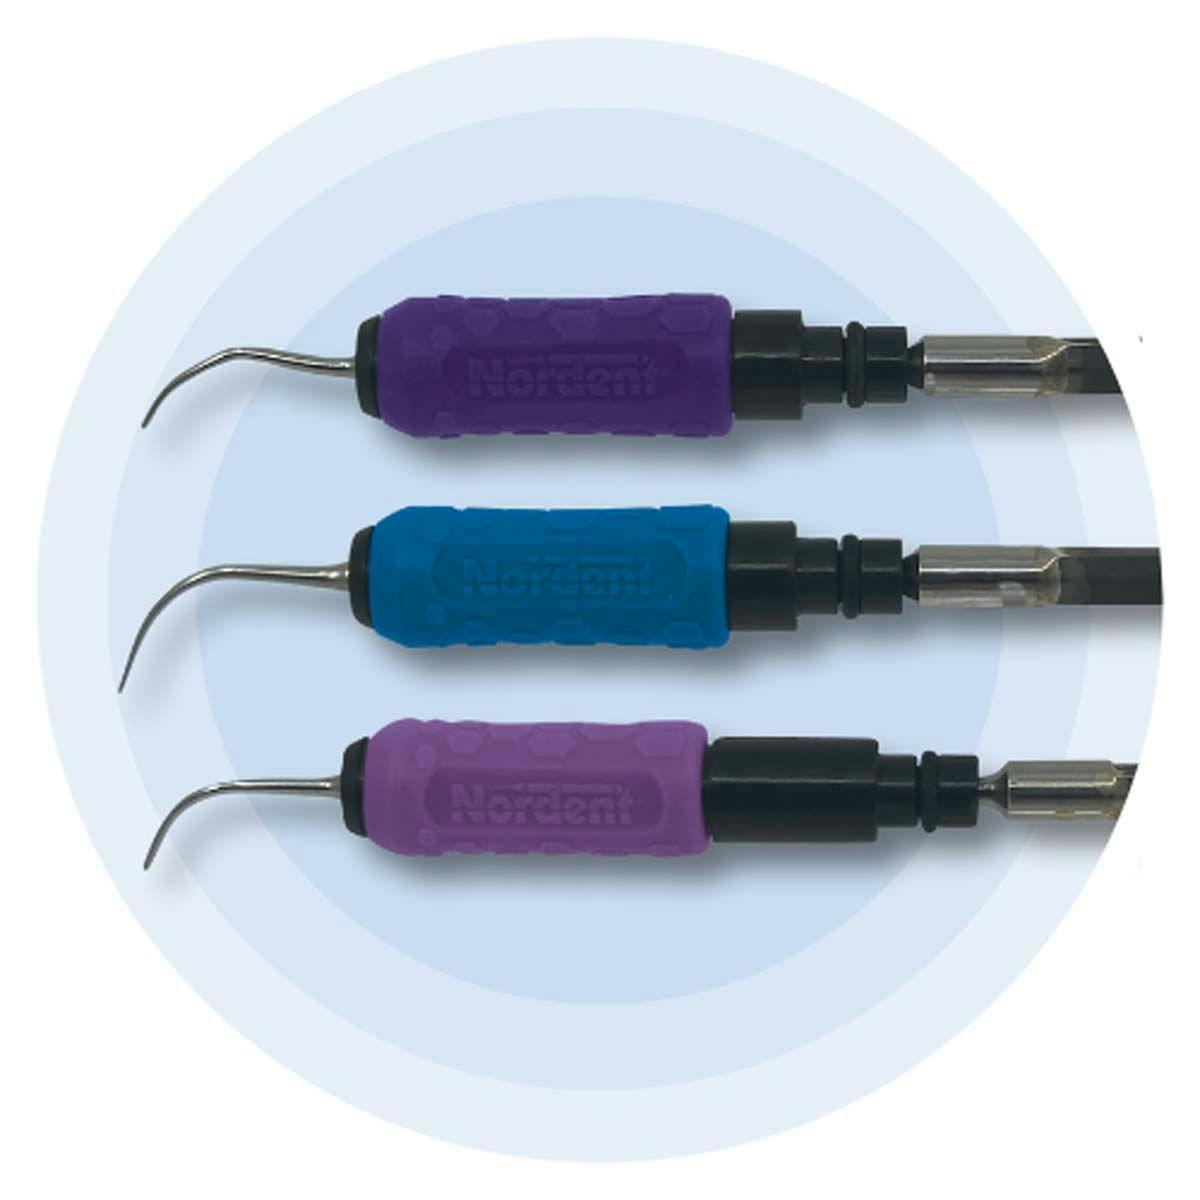 Nordent Launches LuxPoint Ultrasonic Inserts. Image credit: © Nordent